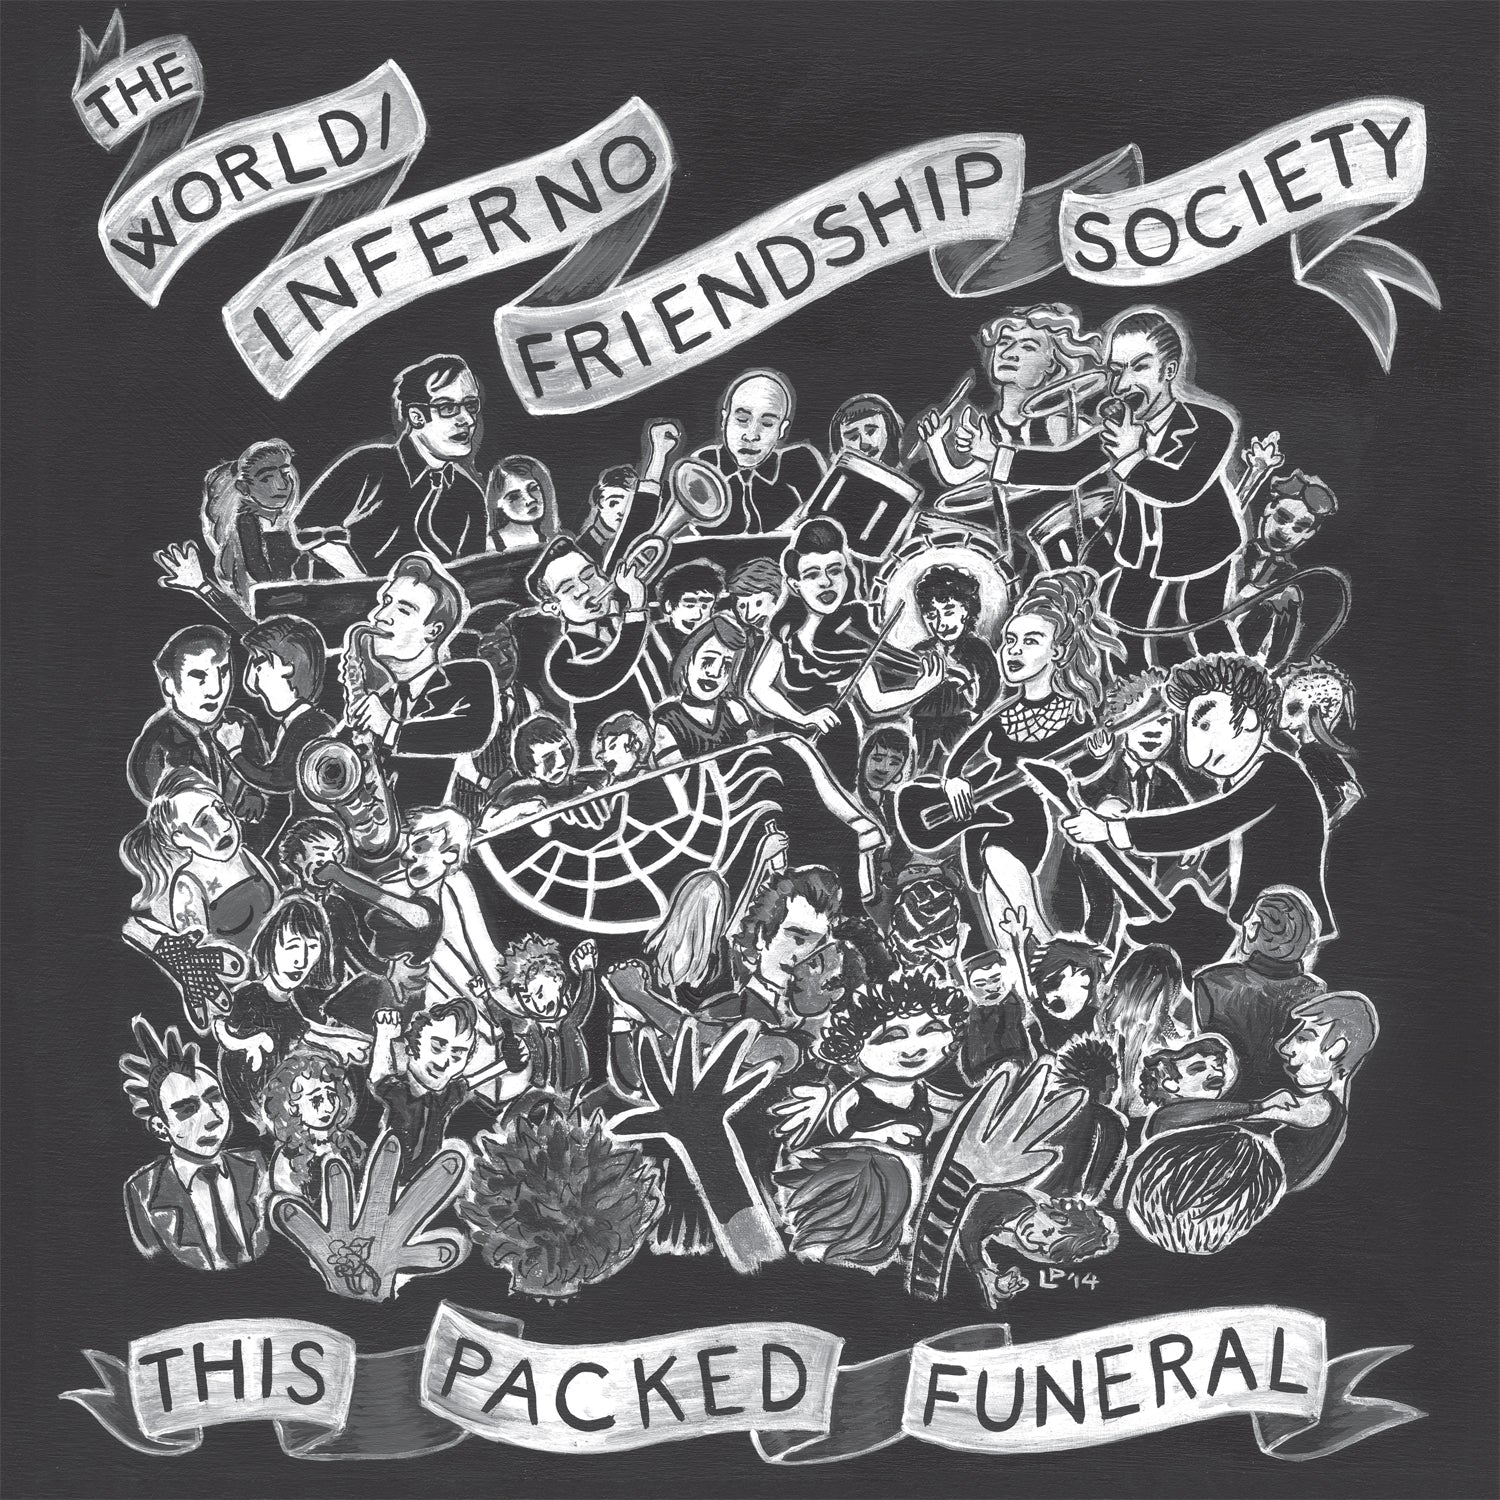 v470 - The World / Inferno Friendship Society - "This Packed Funeral"